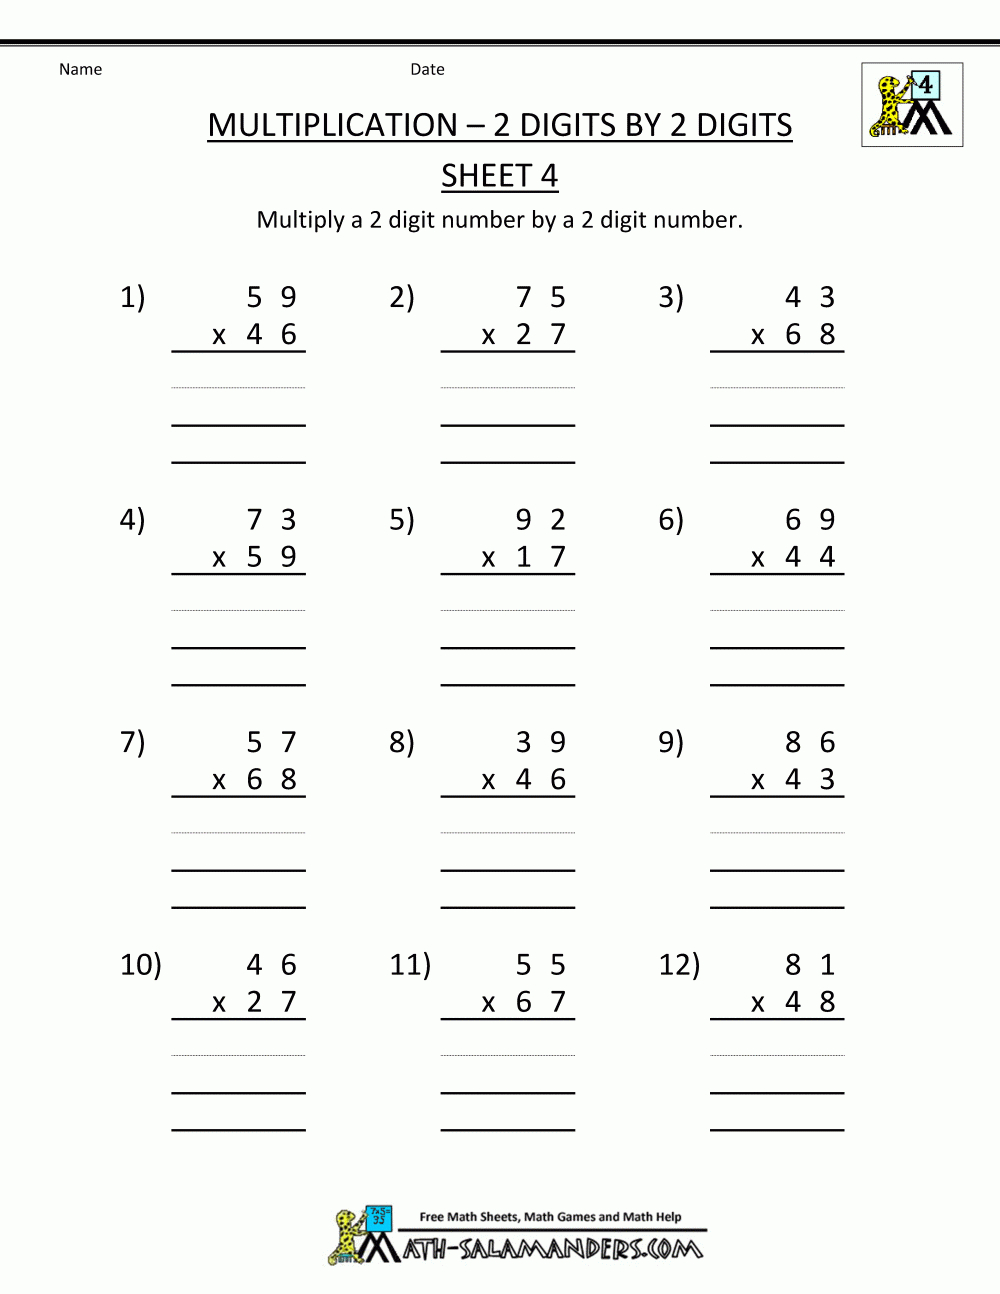 3Digit3Digit Multiplication With Grid Support (A) 3 Digit